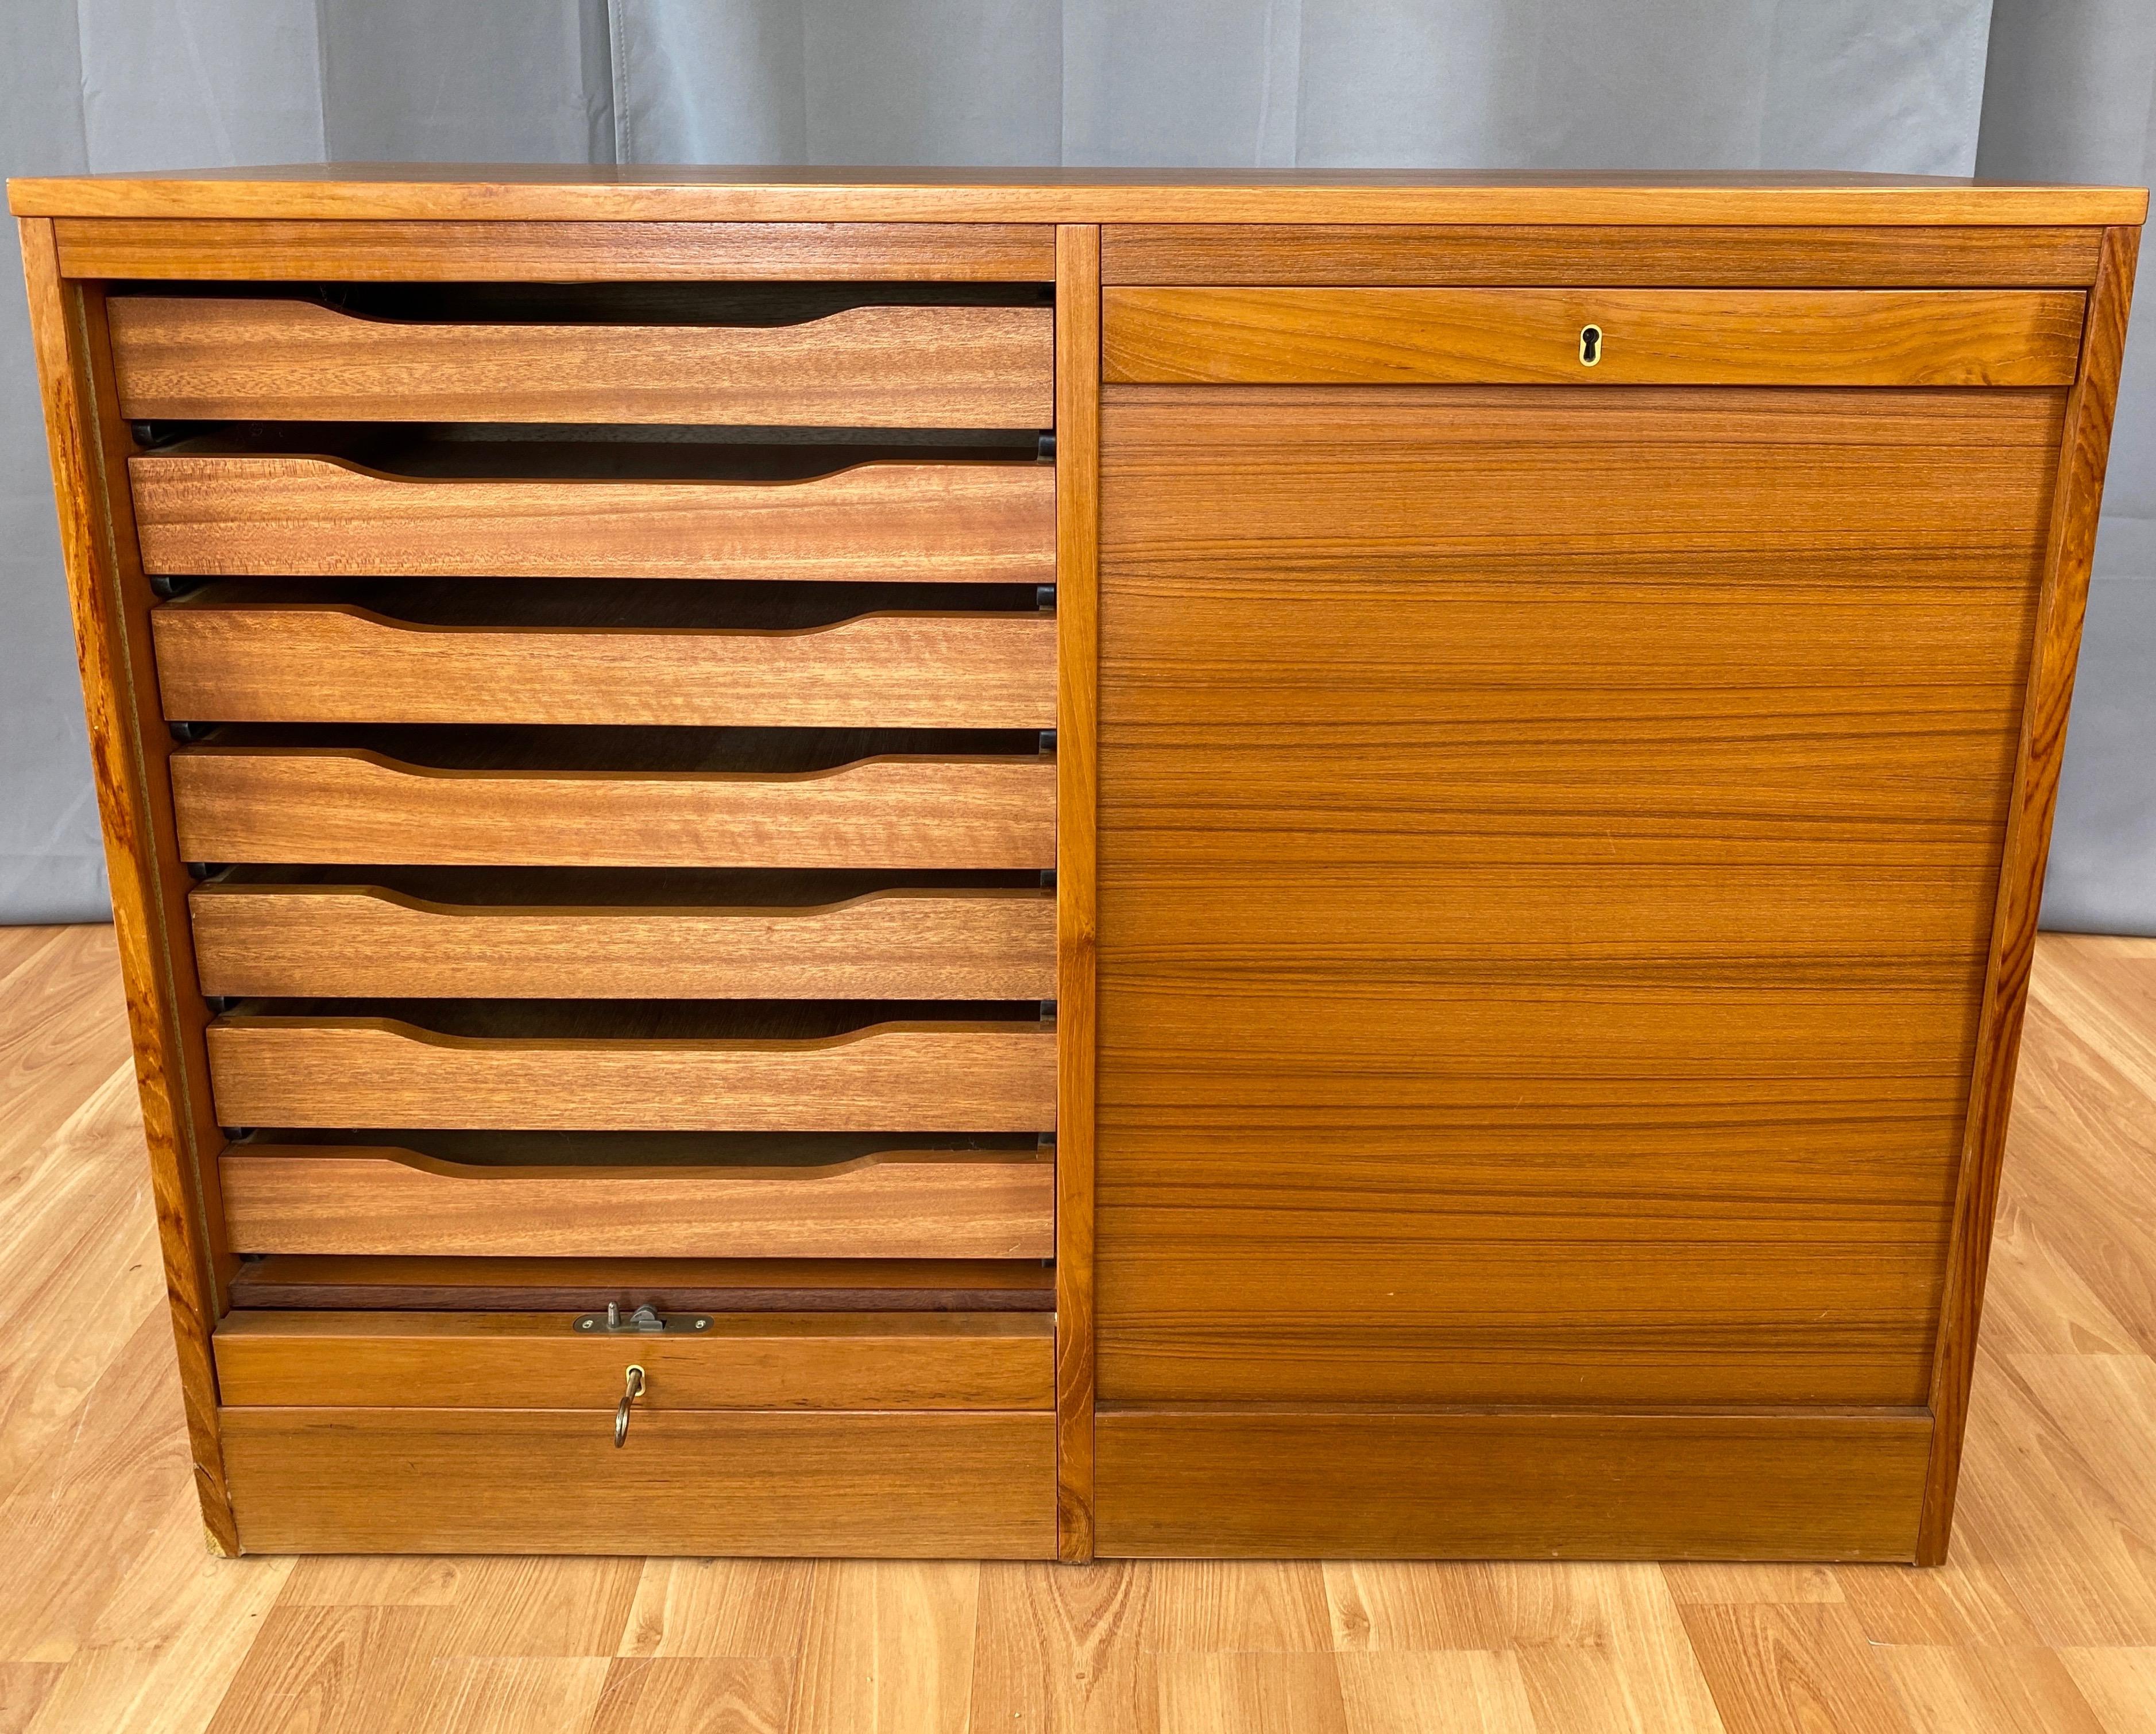 A 1970s Danish modern dual compartment teak file cabinet with drawers and locking tambour doors.

Clean and compact design features smooth-front tambour doors that slide down into the base and out of sight. Each compartment holds seven drawers